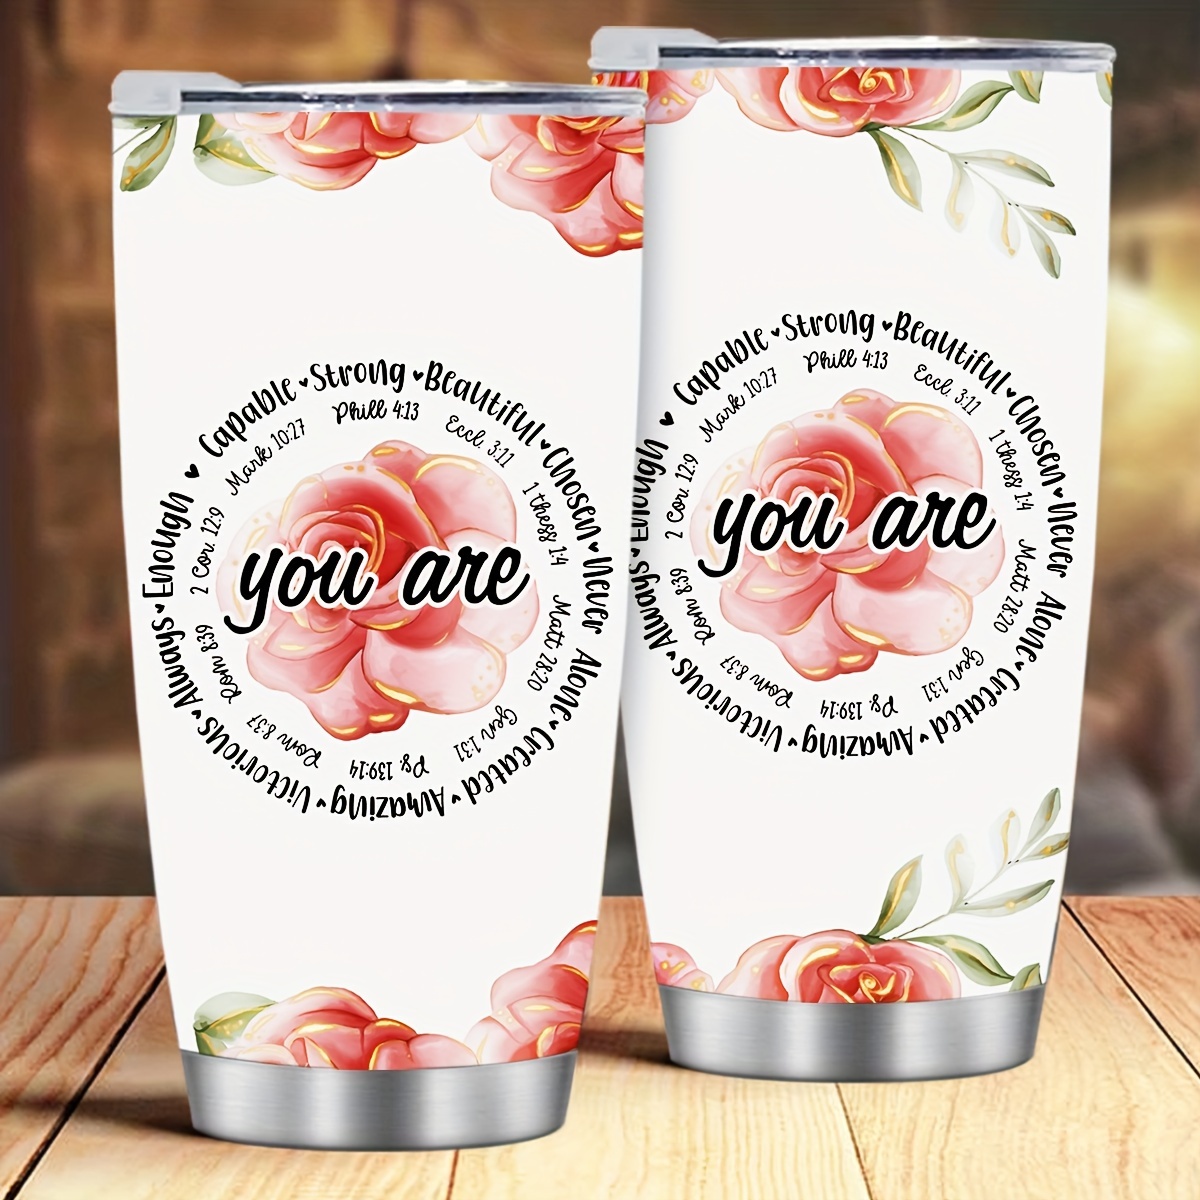 Christian Gifts For Women - Faith Based/ Encouraging/  Biblical/ Spiritual Gifts For Mom, Inspirational Religious Gifts For Women  Best Friend Sisters, Christian Tumblers: Tumblers & Water Glasses